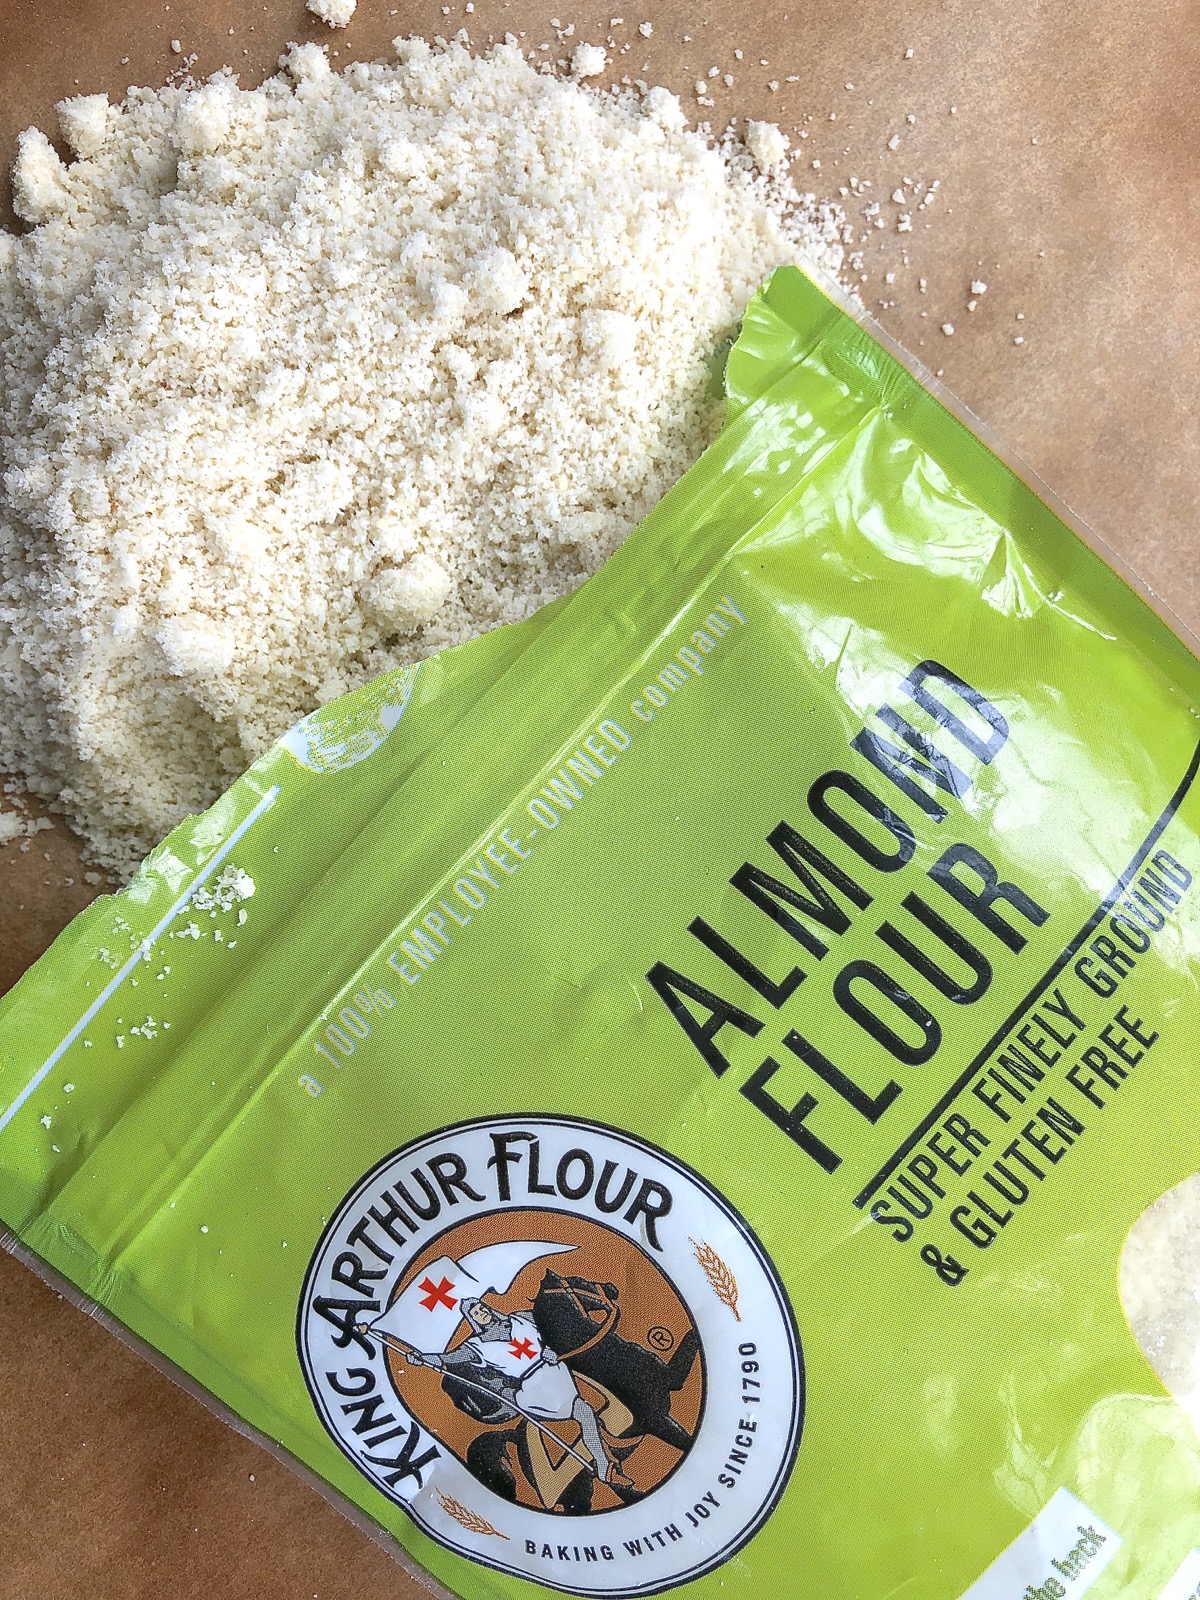 Open bag of almond flour with some spilled out on cutting board.